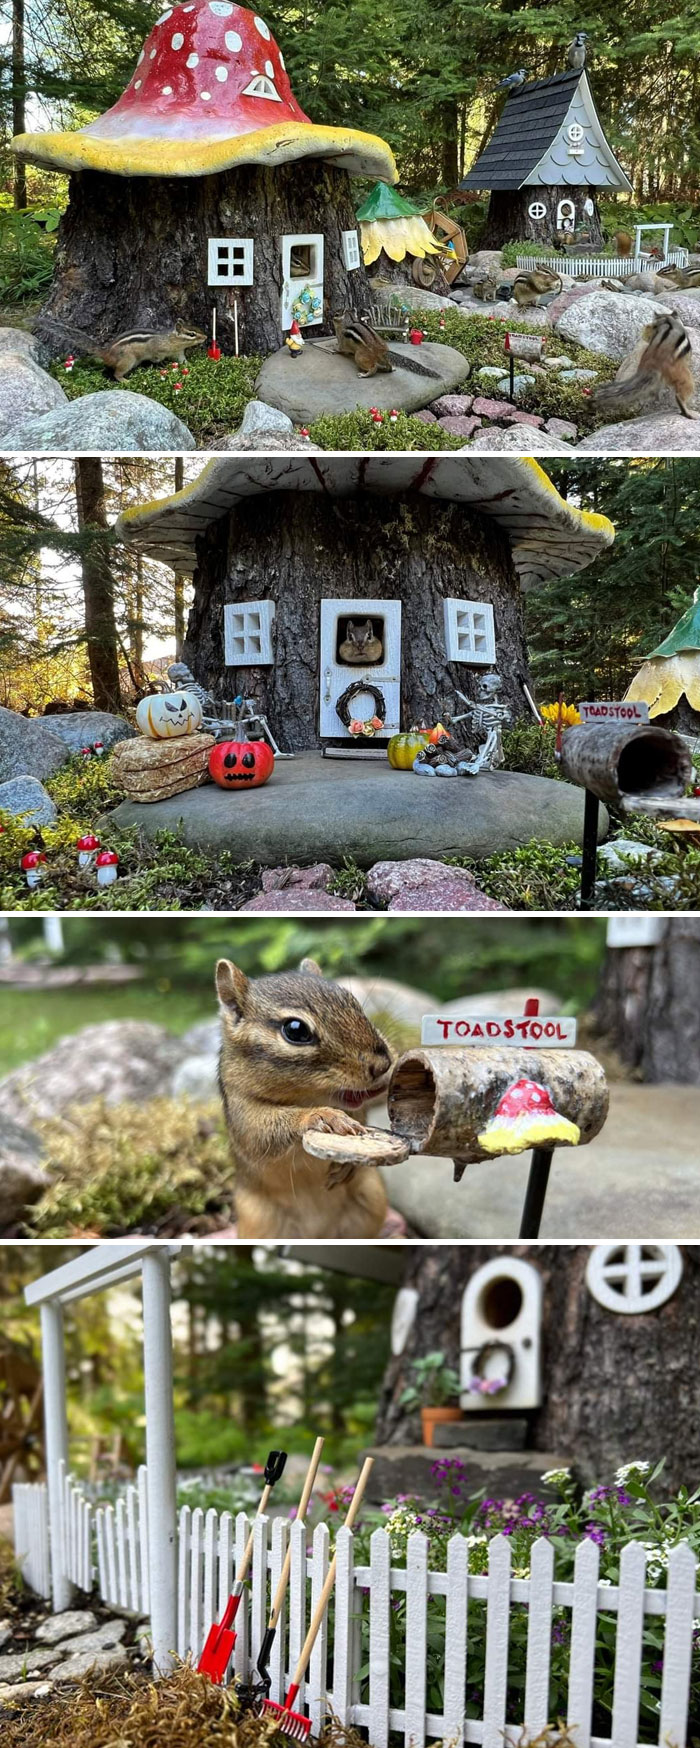 My Coworker Built A Feeding Station For His Local Chipmunks